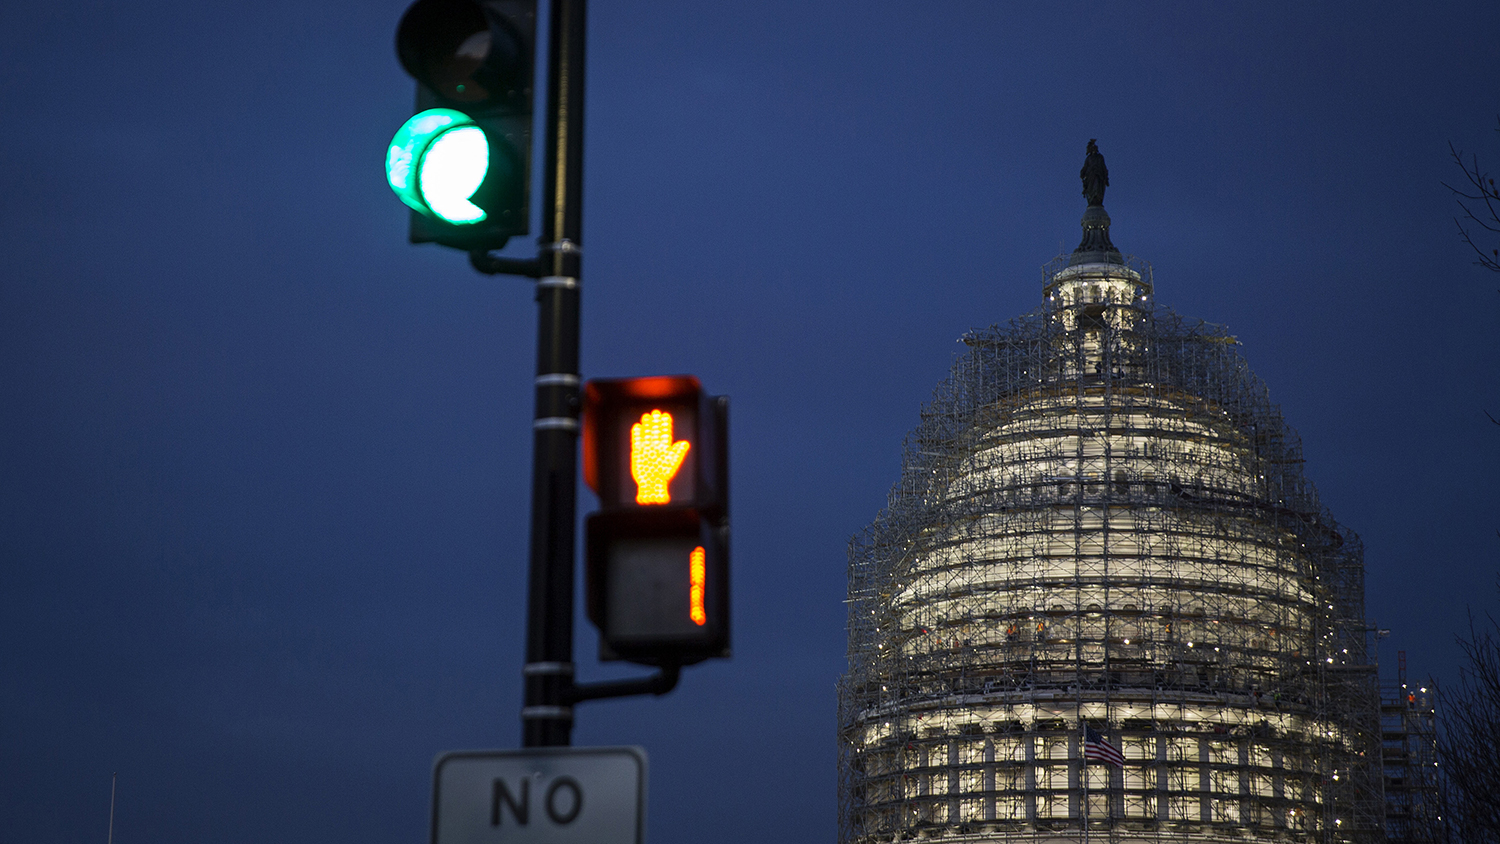 The illuminated dome of the U.S. Capitol building is seen behind a traffic light in Washington on Dec. 11, 2015.
